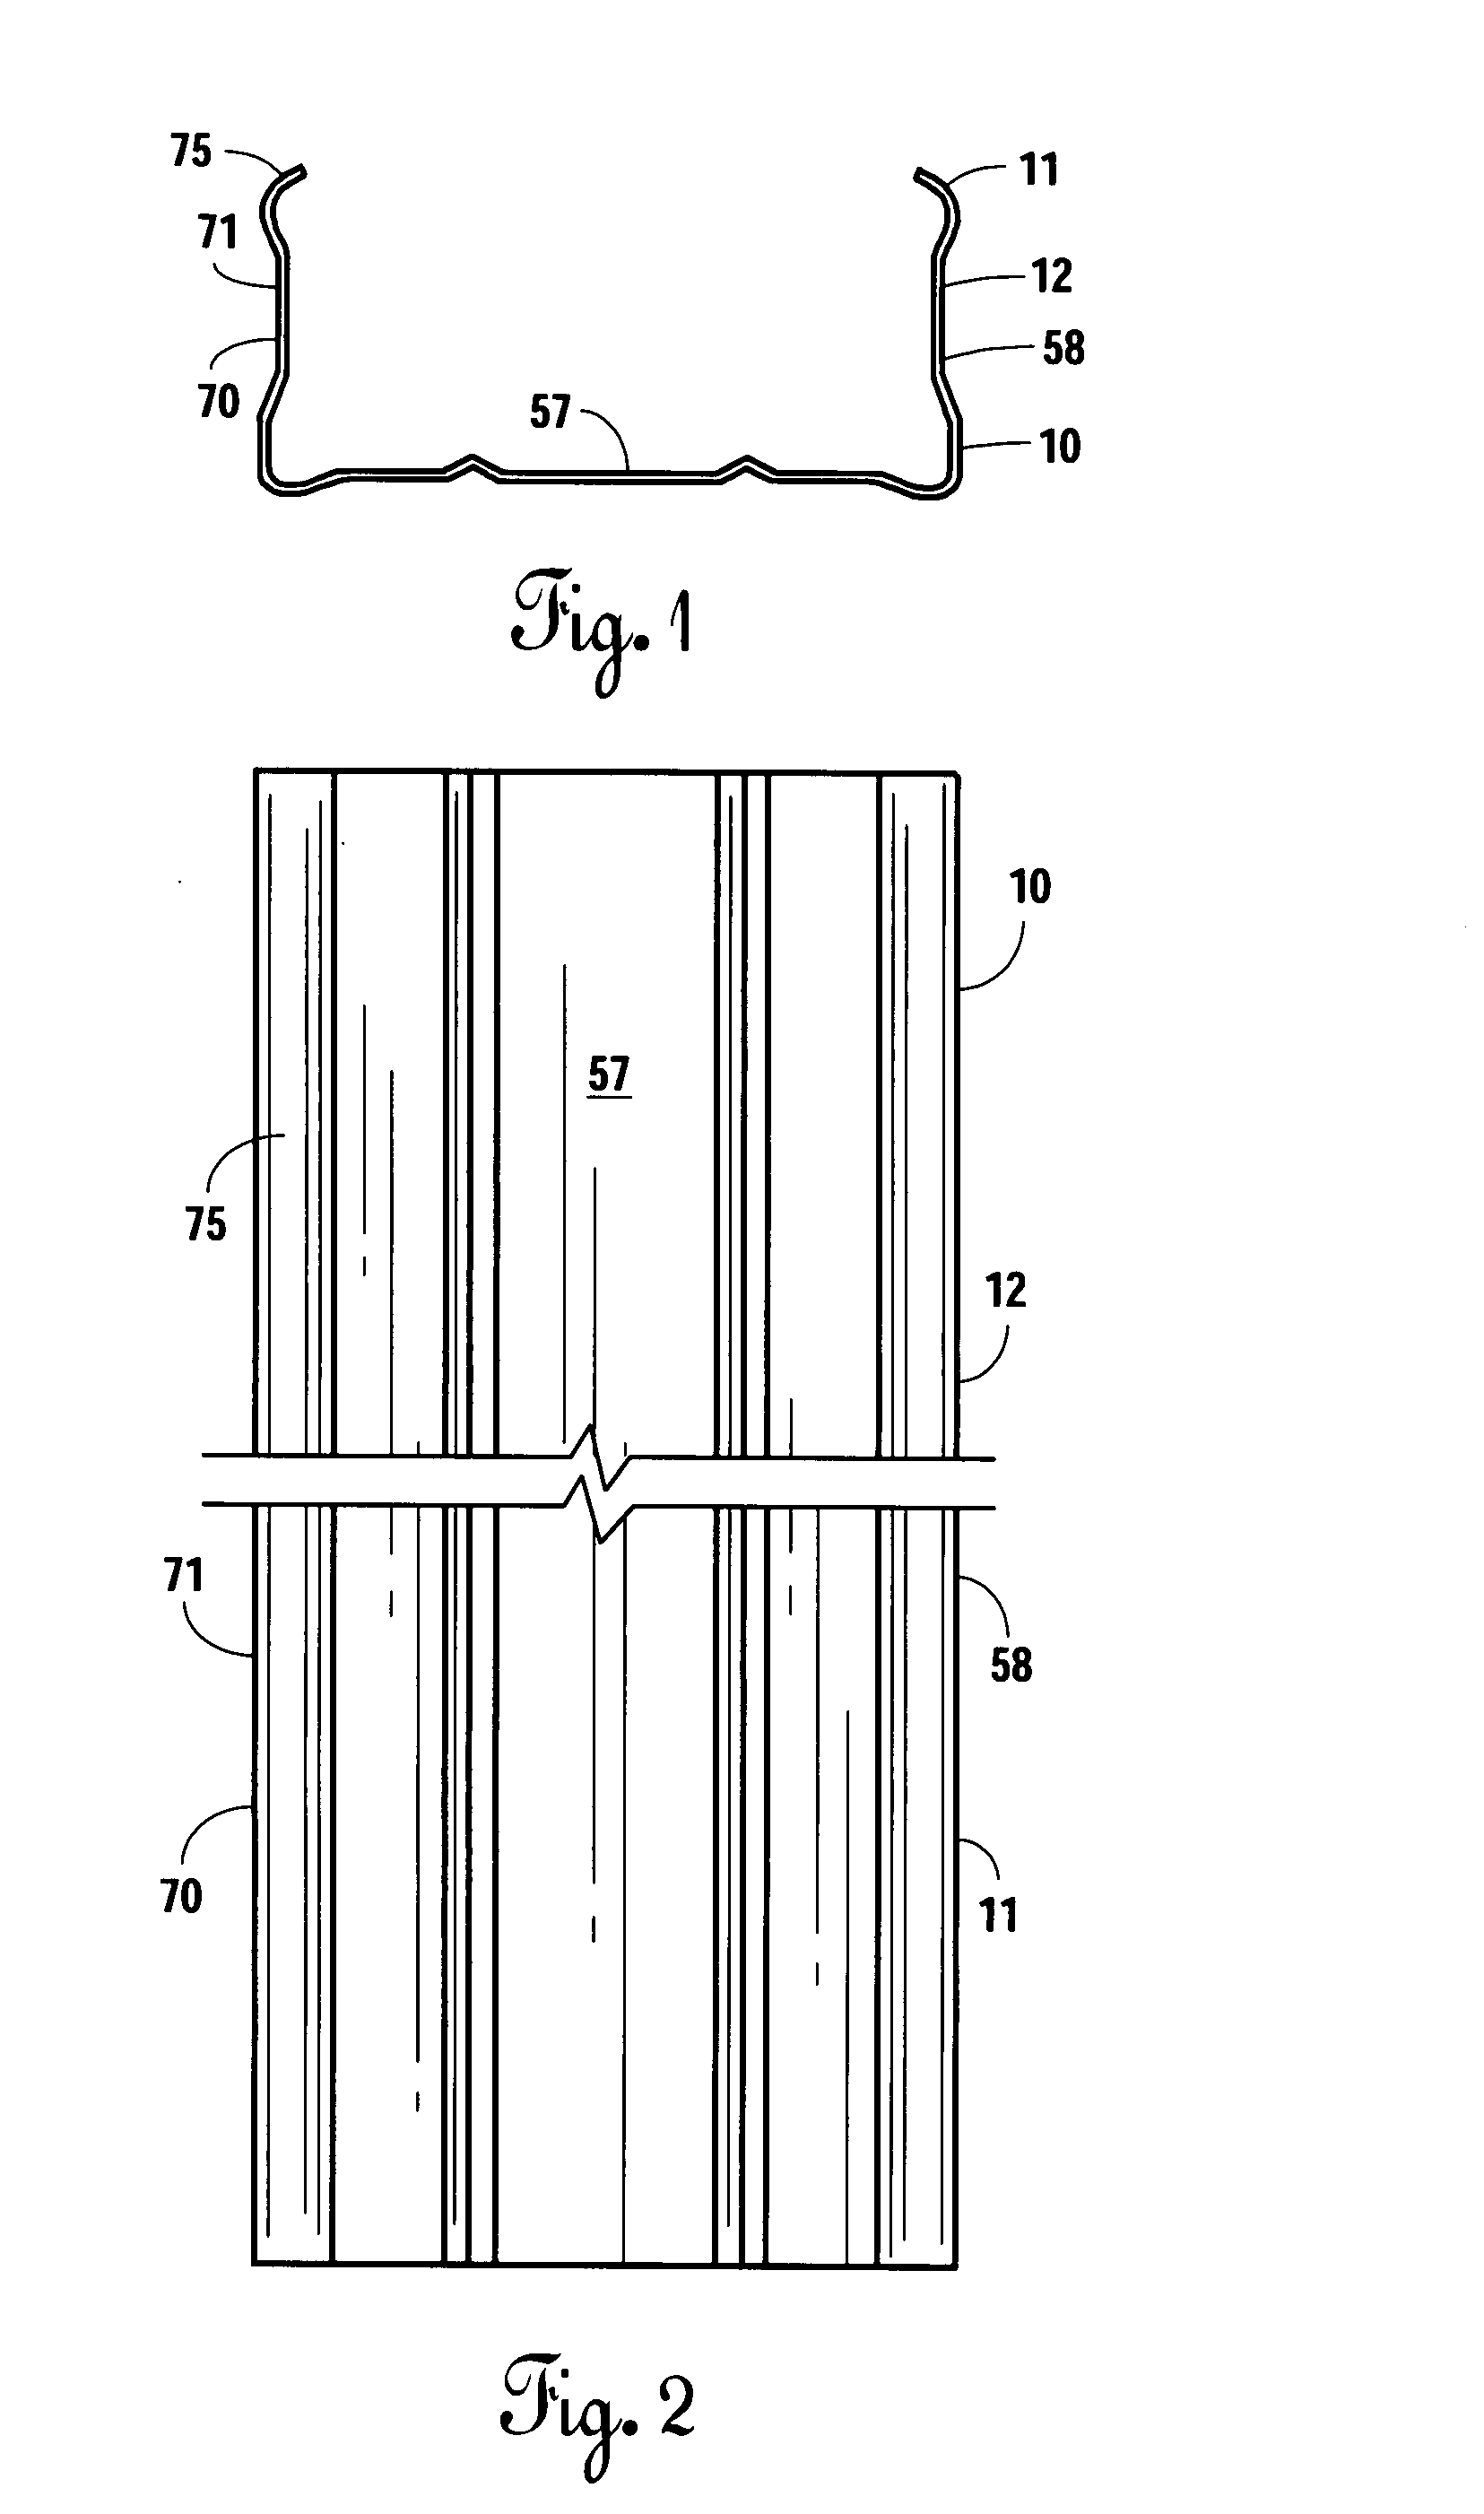 Modular building system and methods thereof